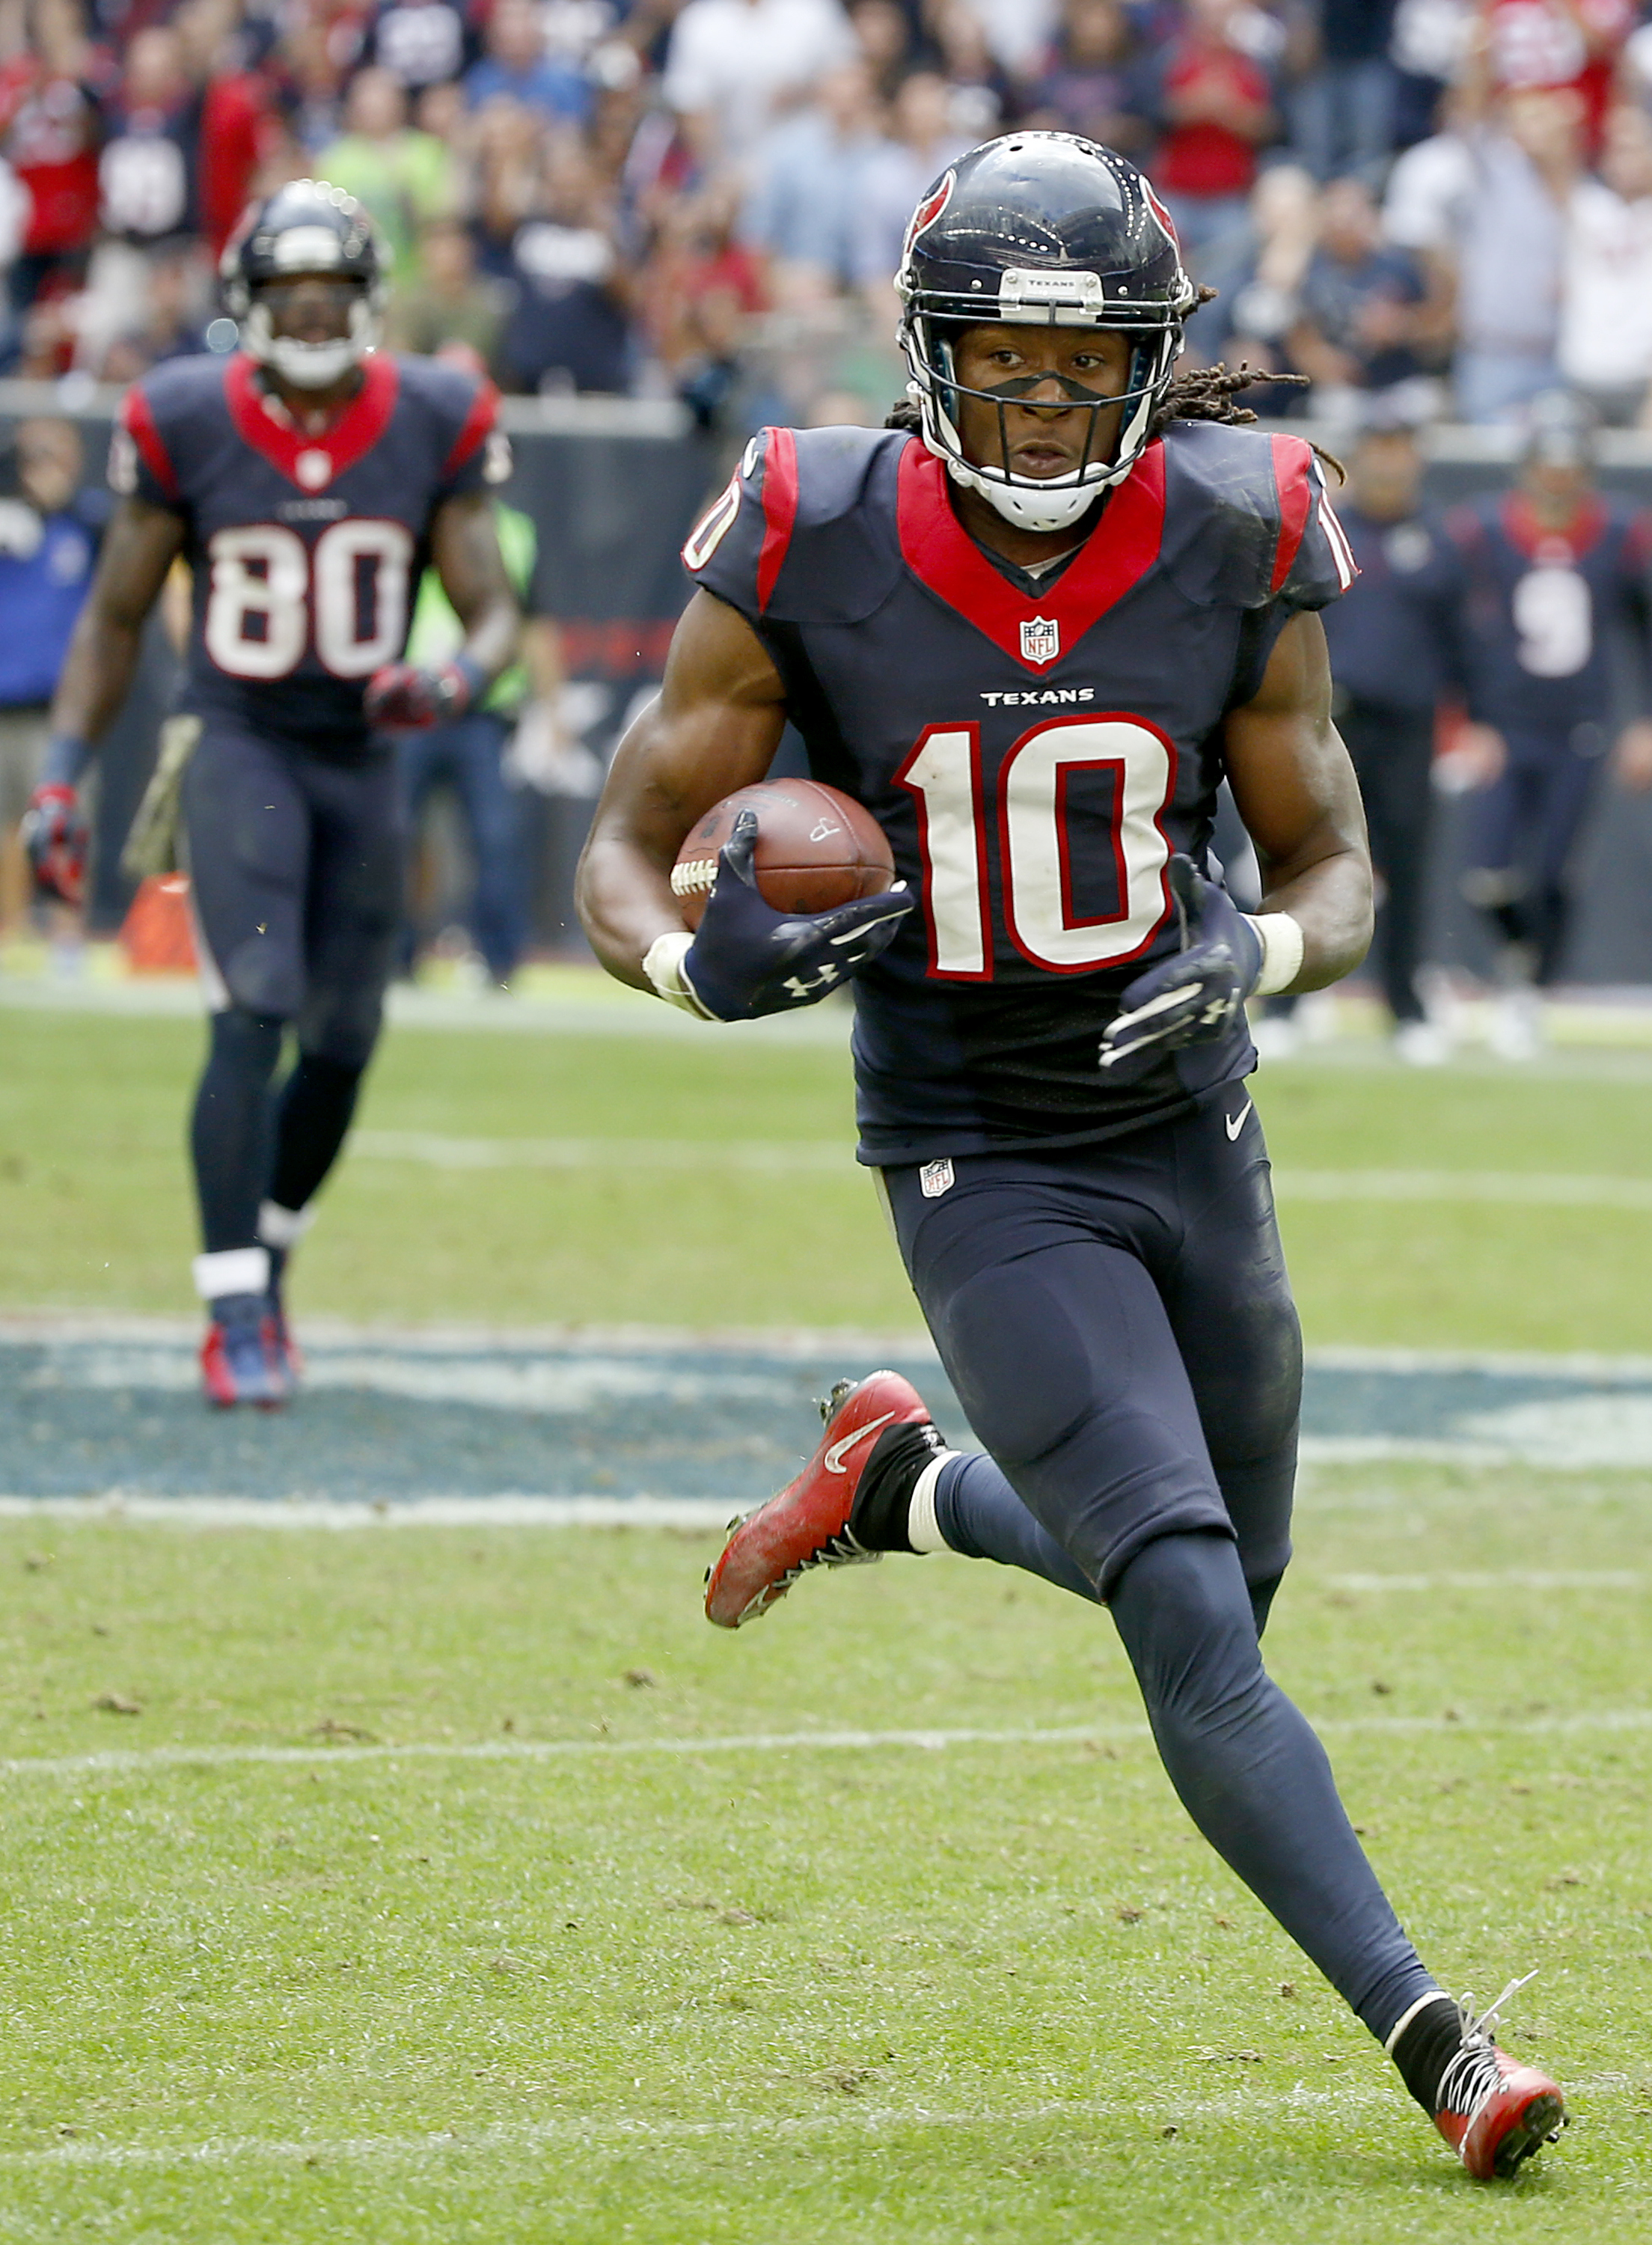 DeAndre Hopkins had a career game as Houston obliterated the hapless, sad Tennessee Titans 45-21